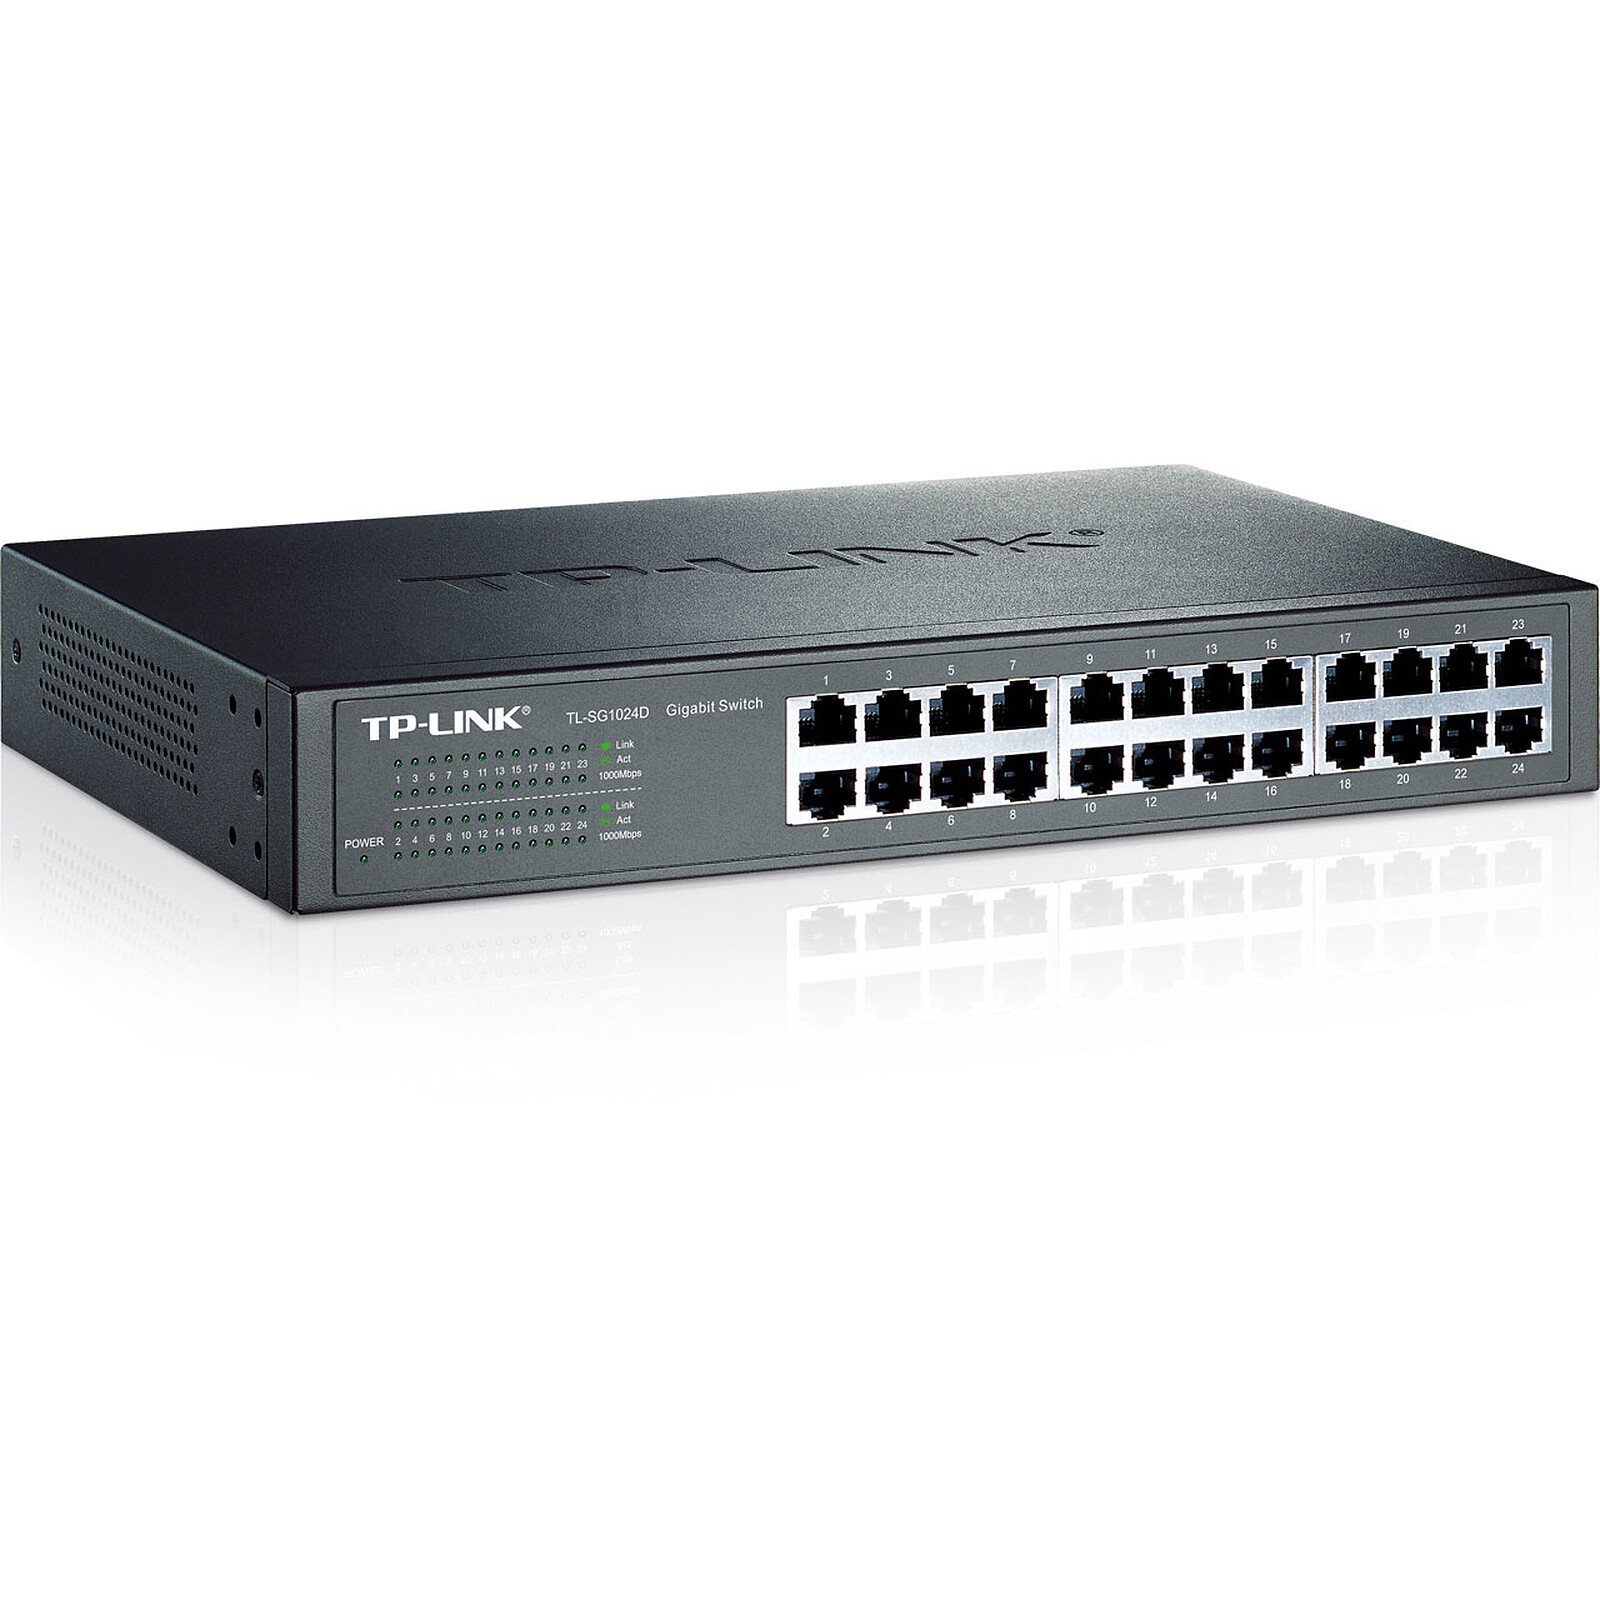 TP-LINK TL-SG1024D · Used - Network switch - LDLC 3-year warranty ...